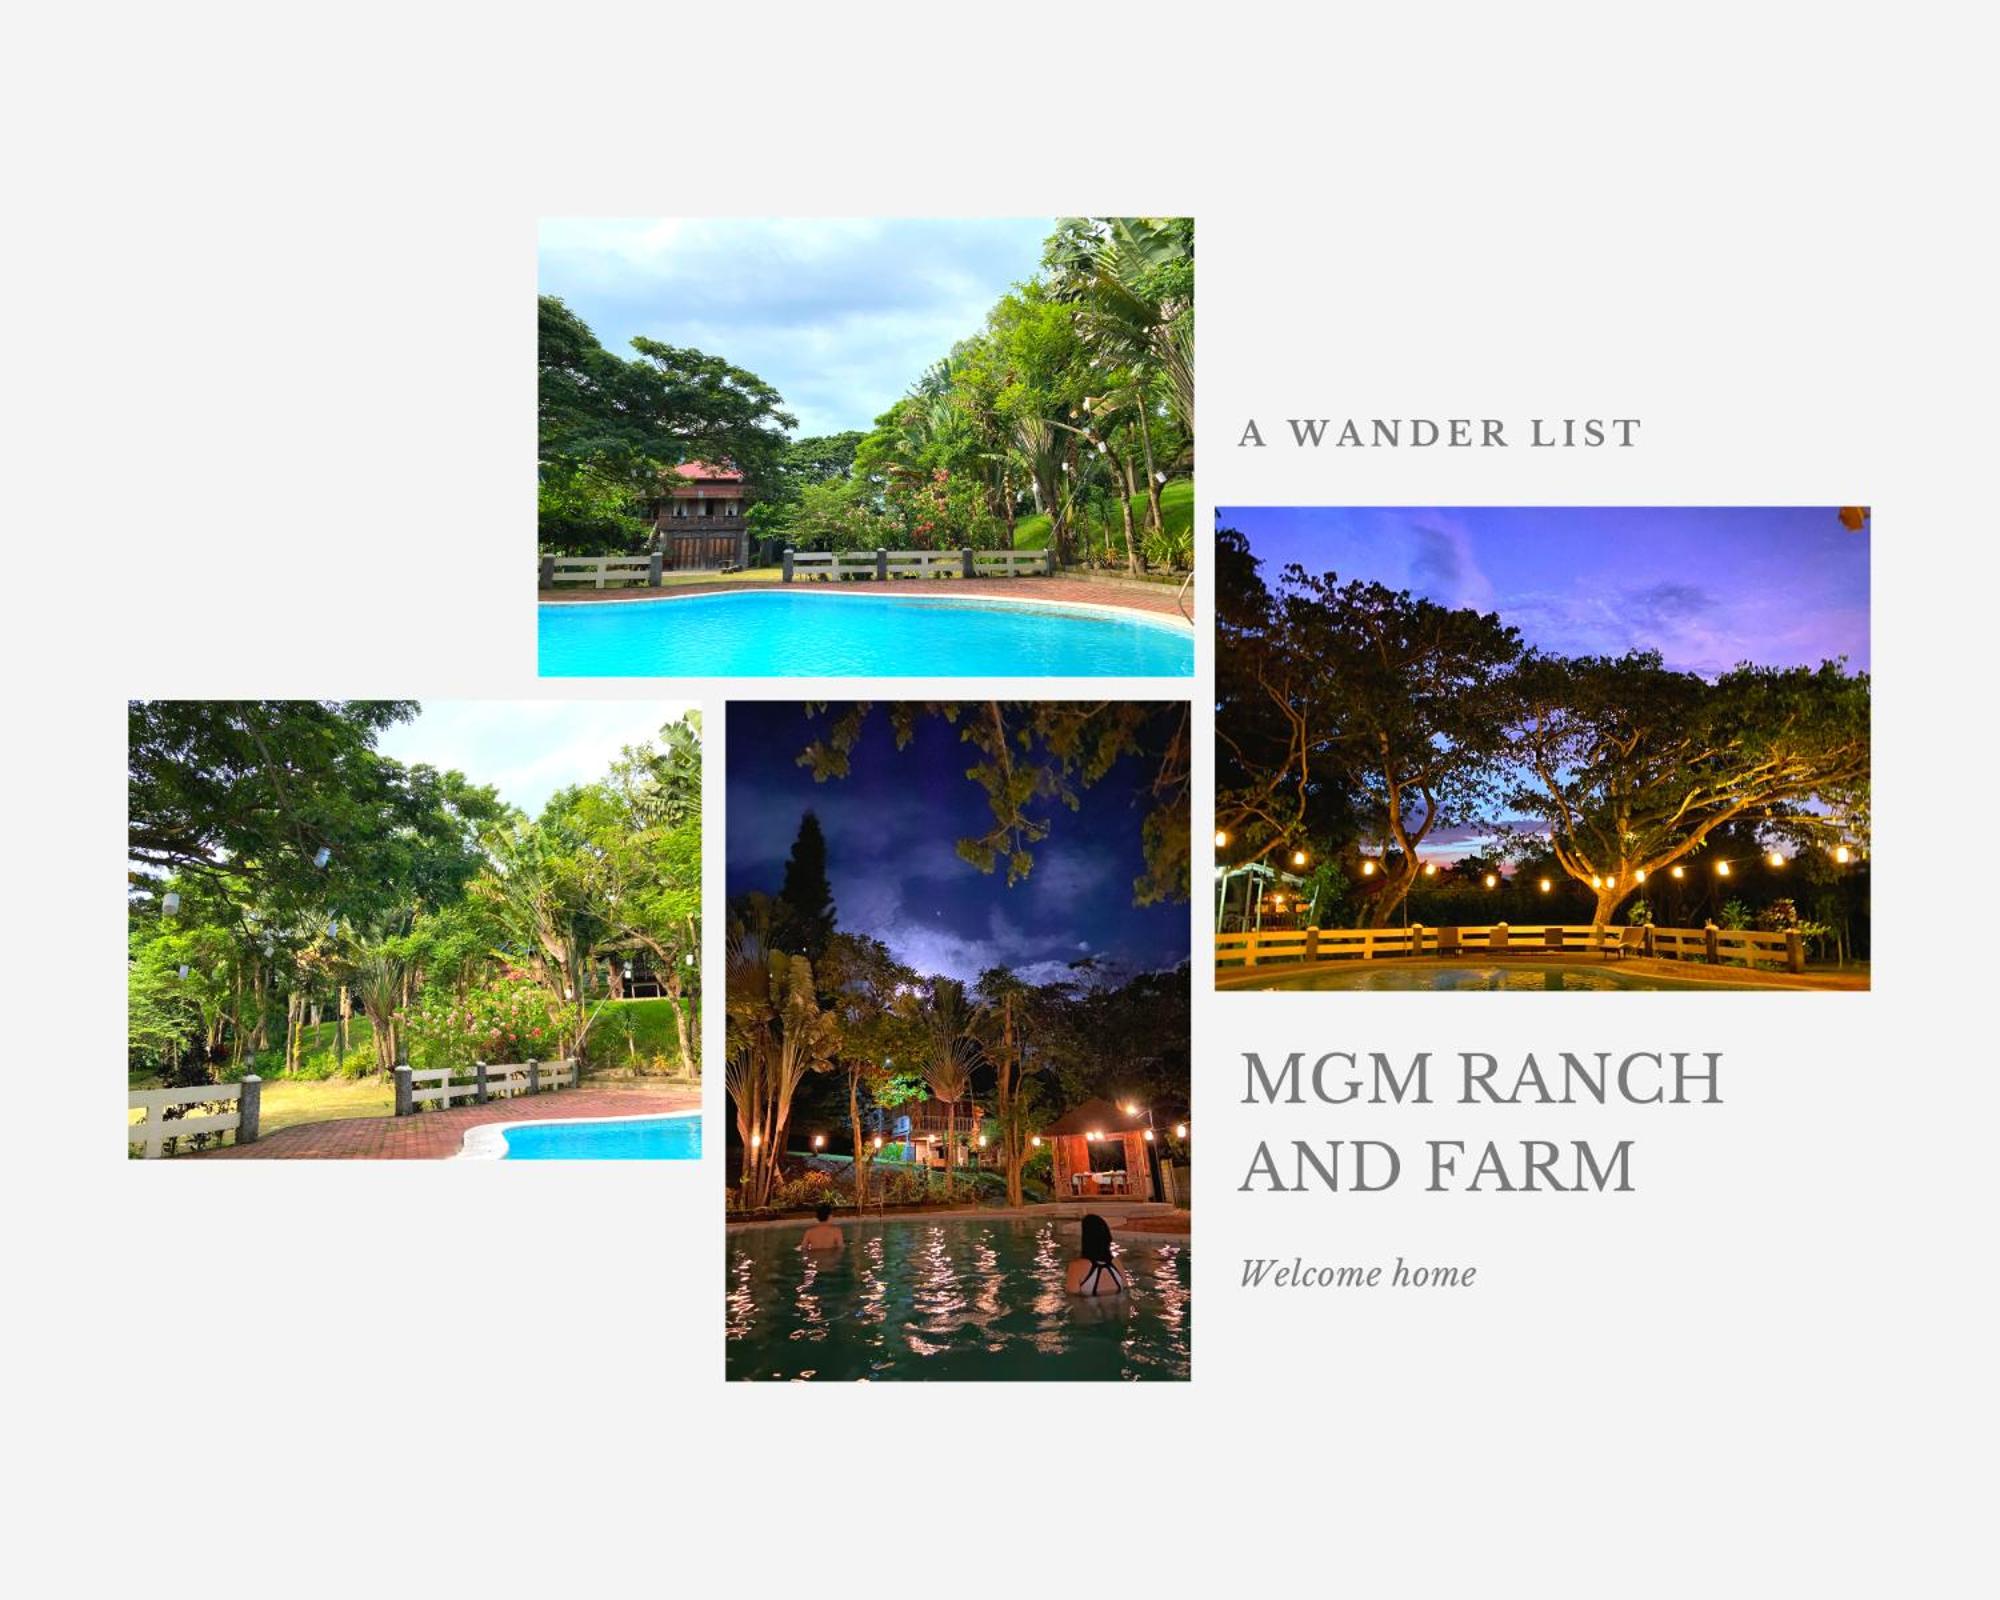 MGM Ranch and Farm